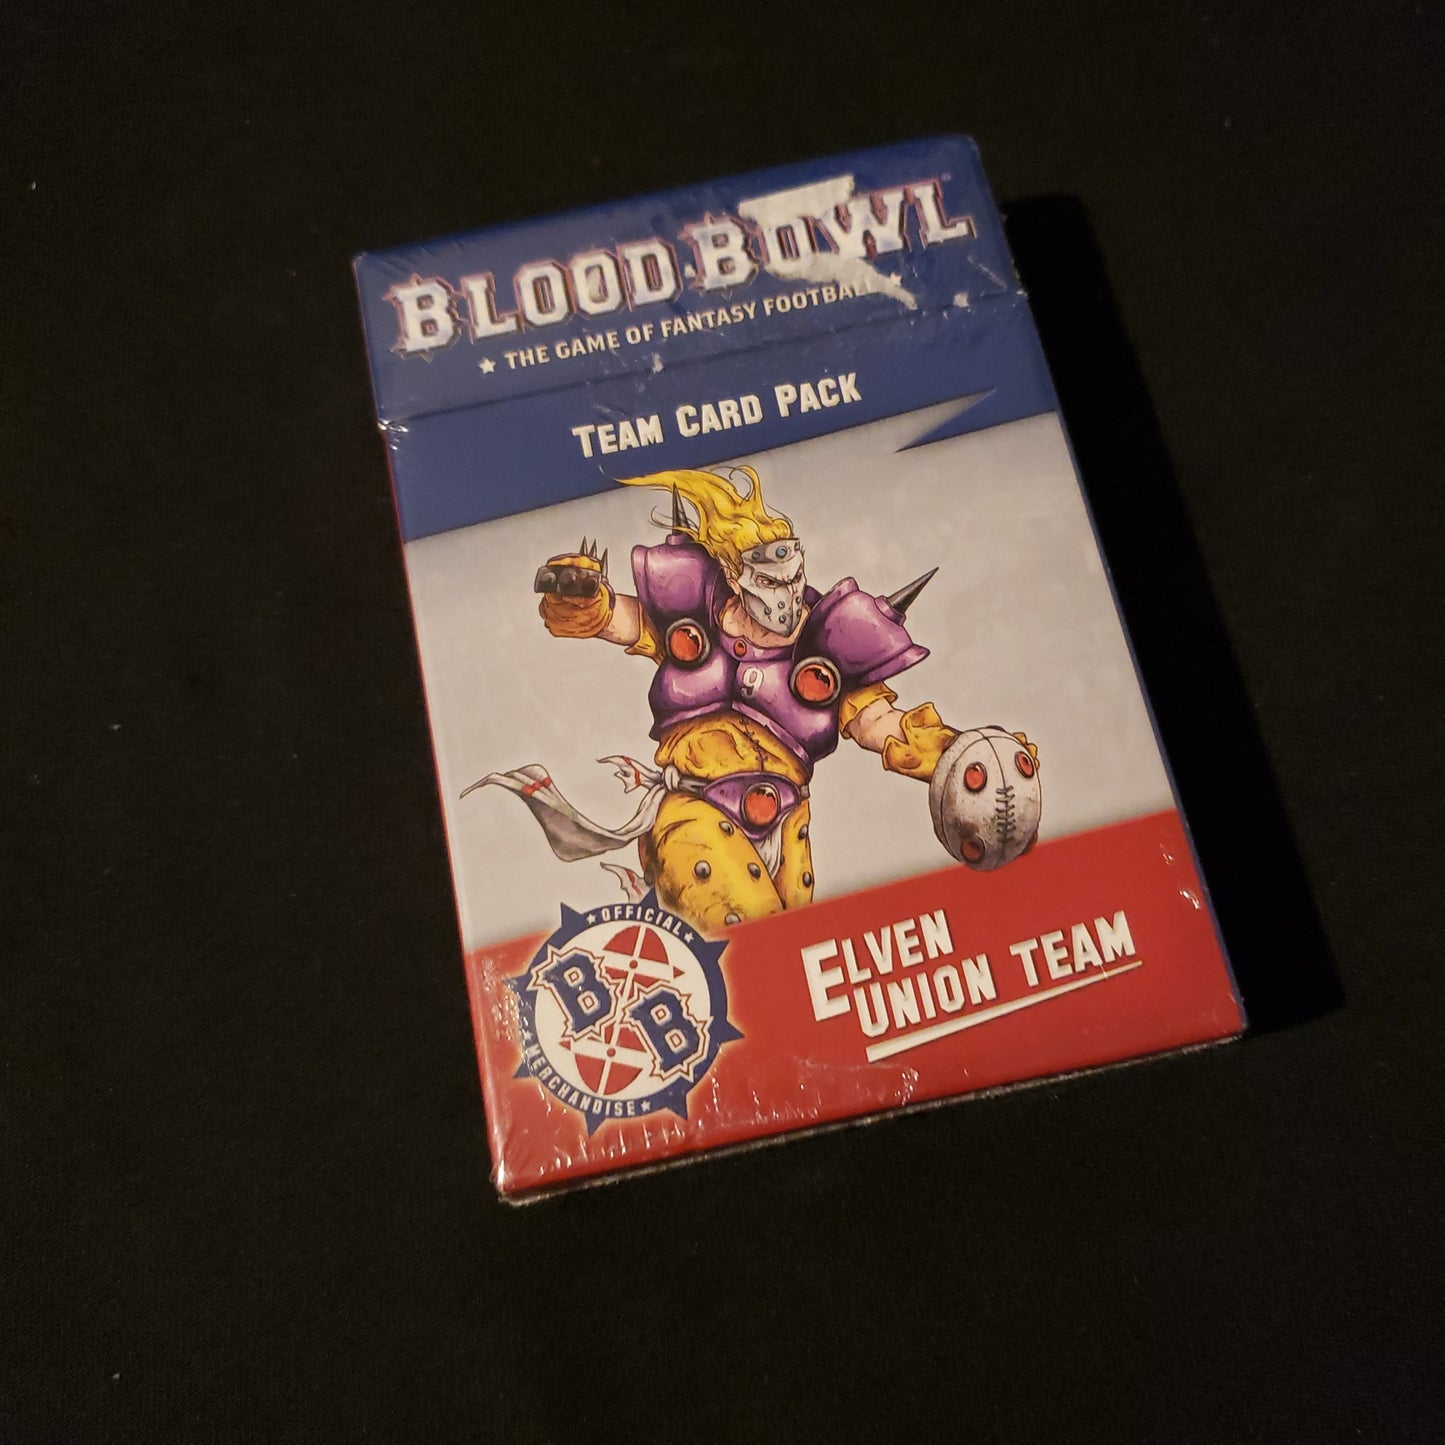 Image shows the front of the box for the Elven Union Team Card Pack for the Blood Bowl miniatures game